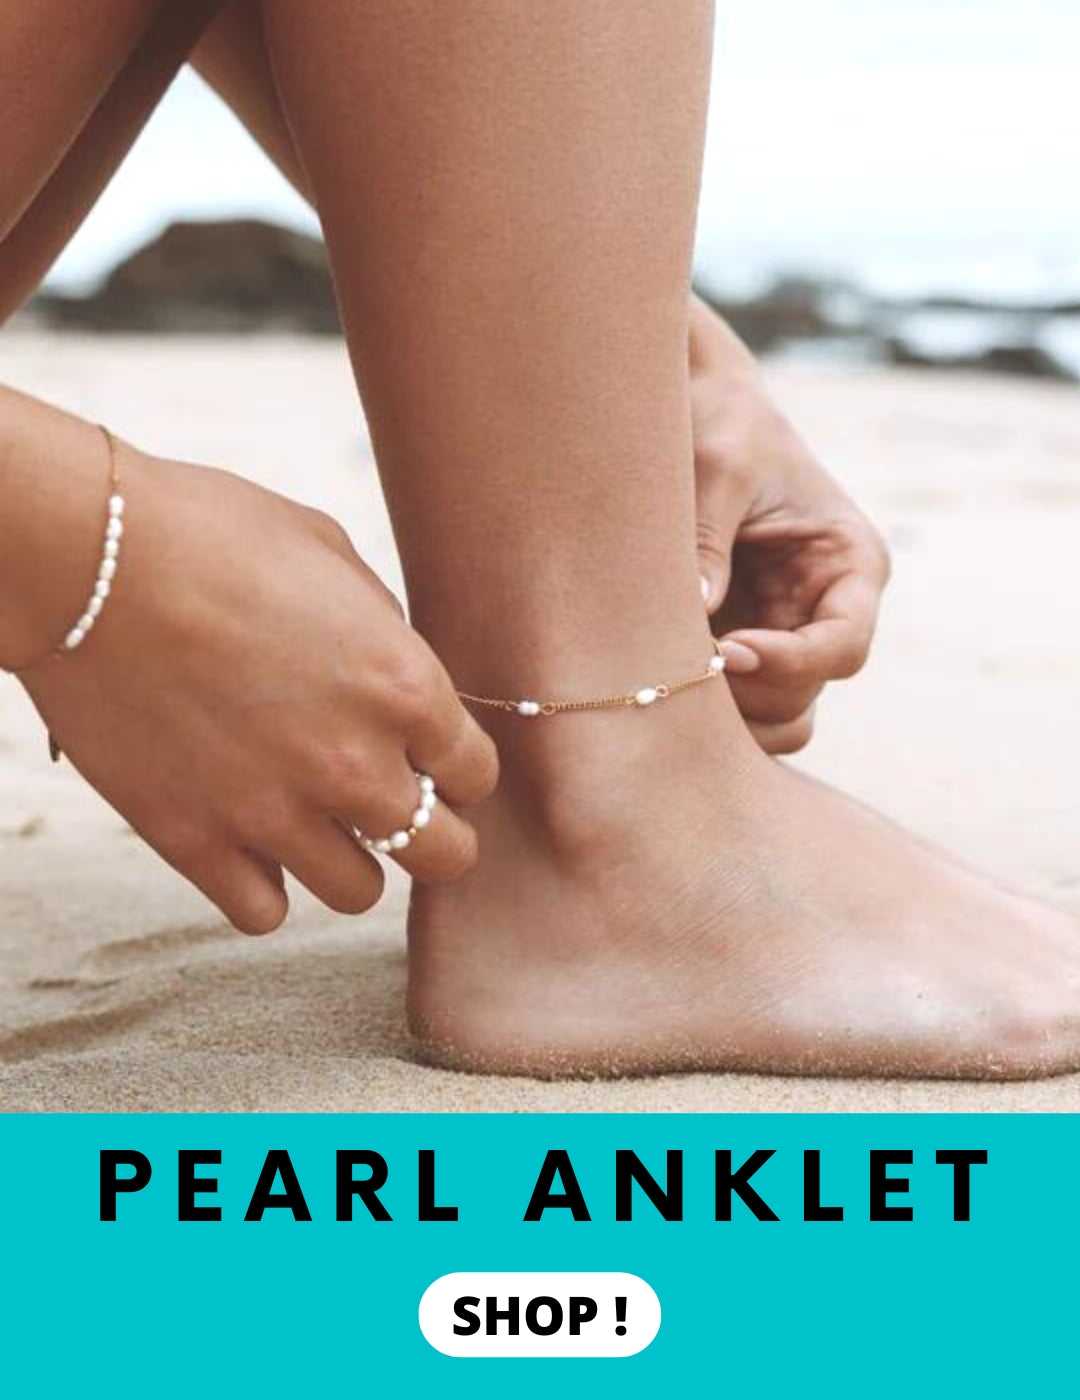 Interesting facts about Pearl anklets